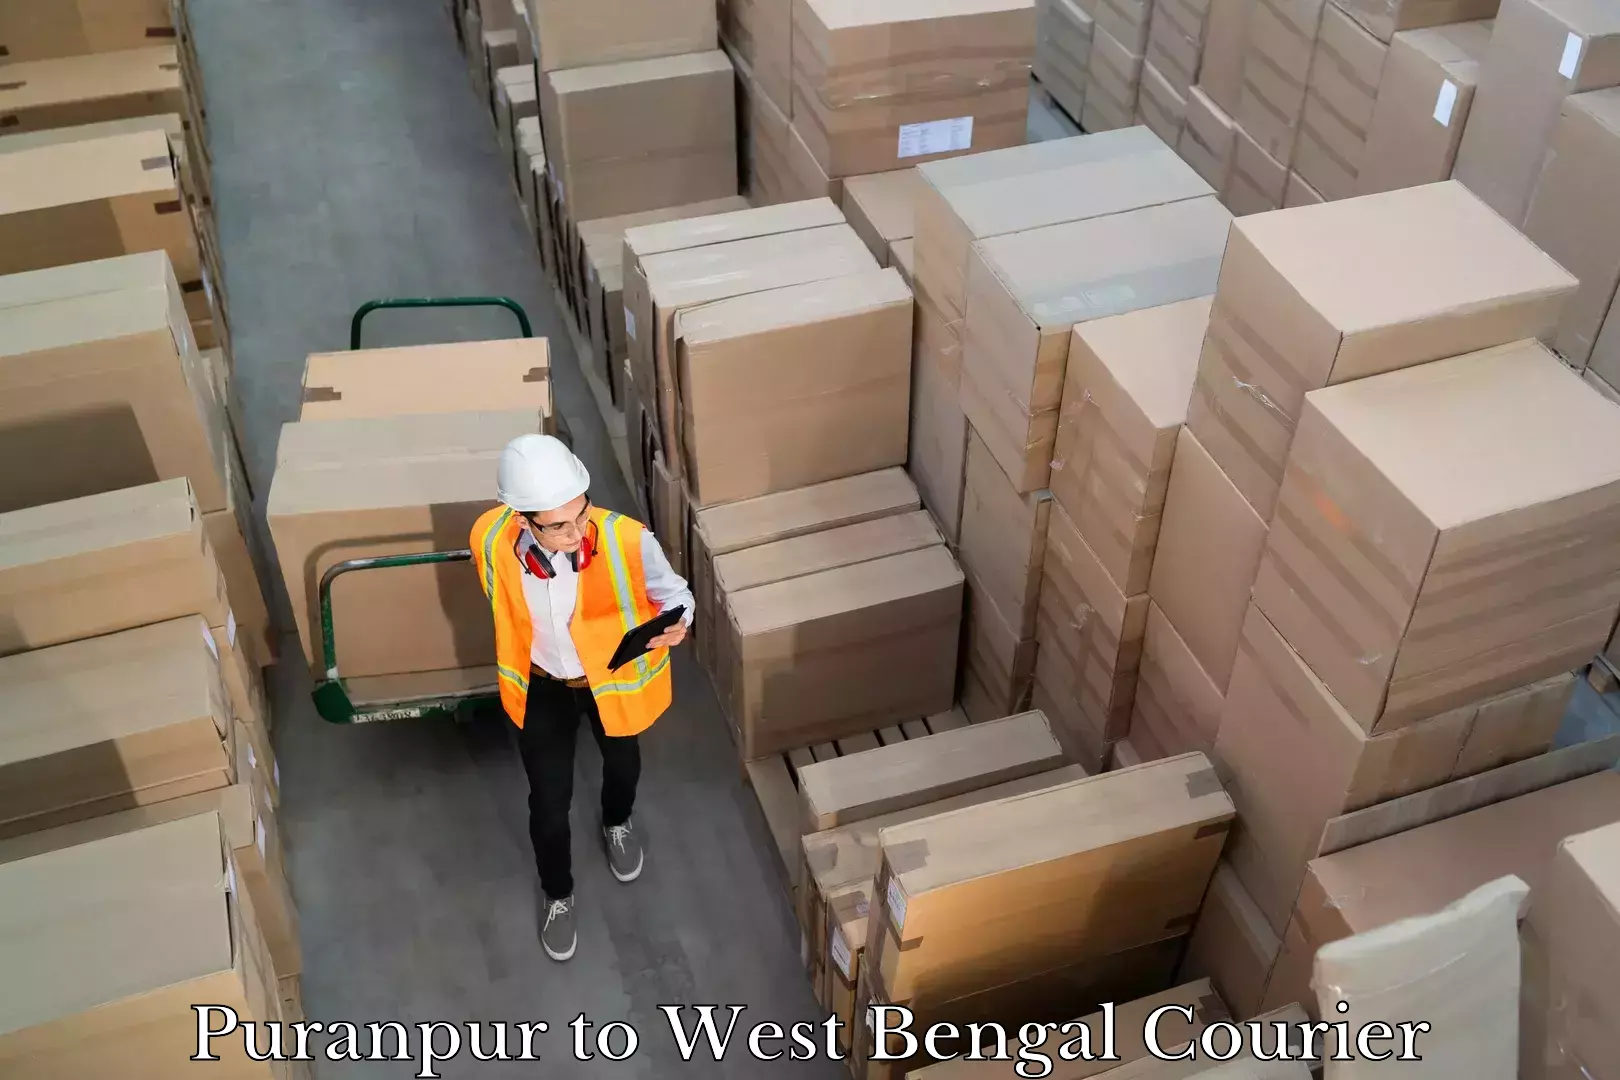 Delivery service partnership Puranpur to West Bengal